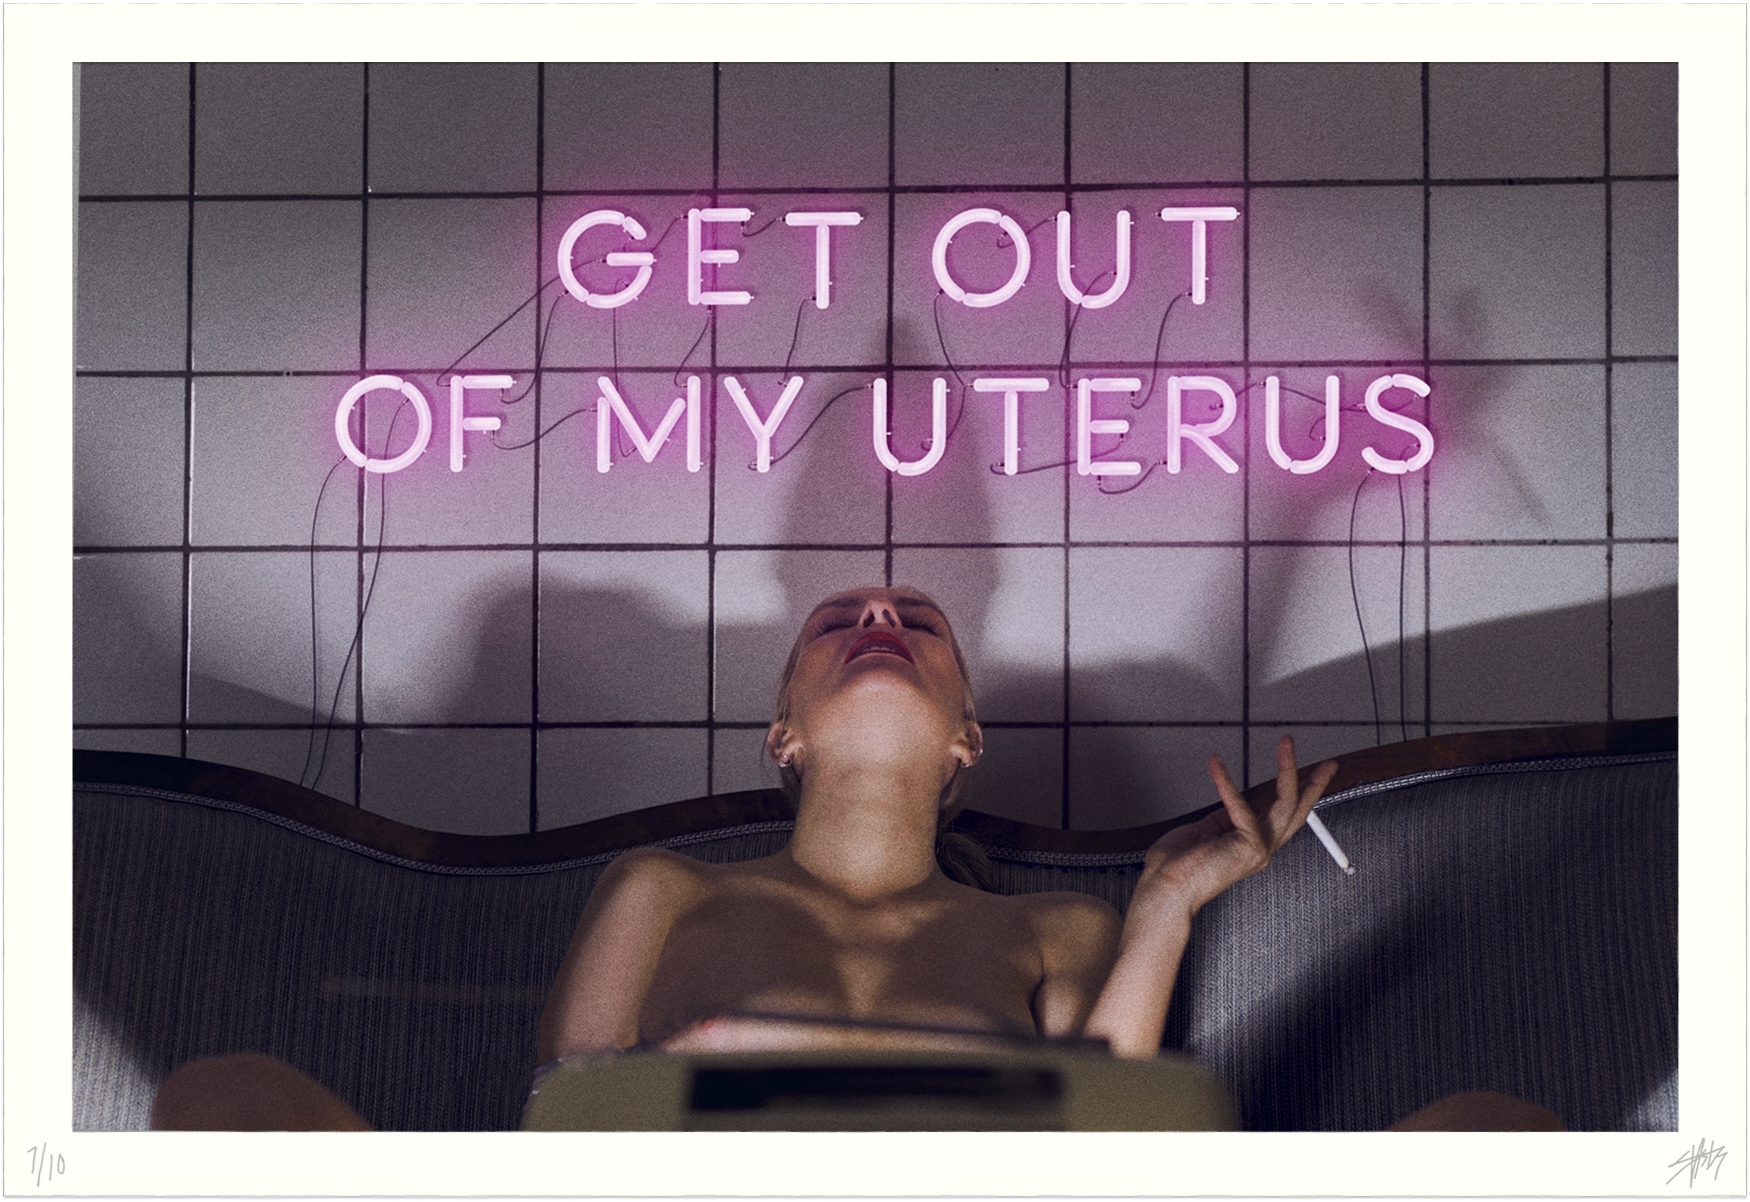 Get out of my uterus